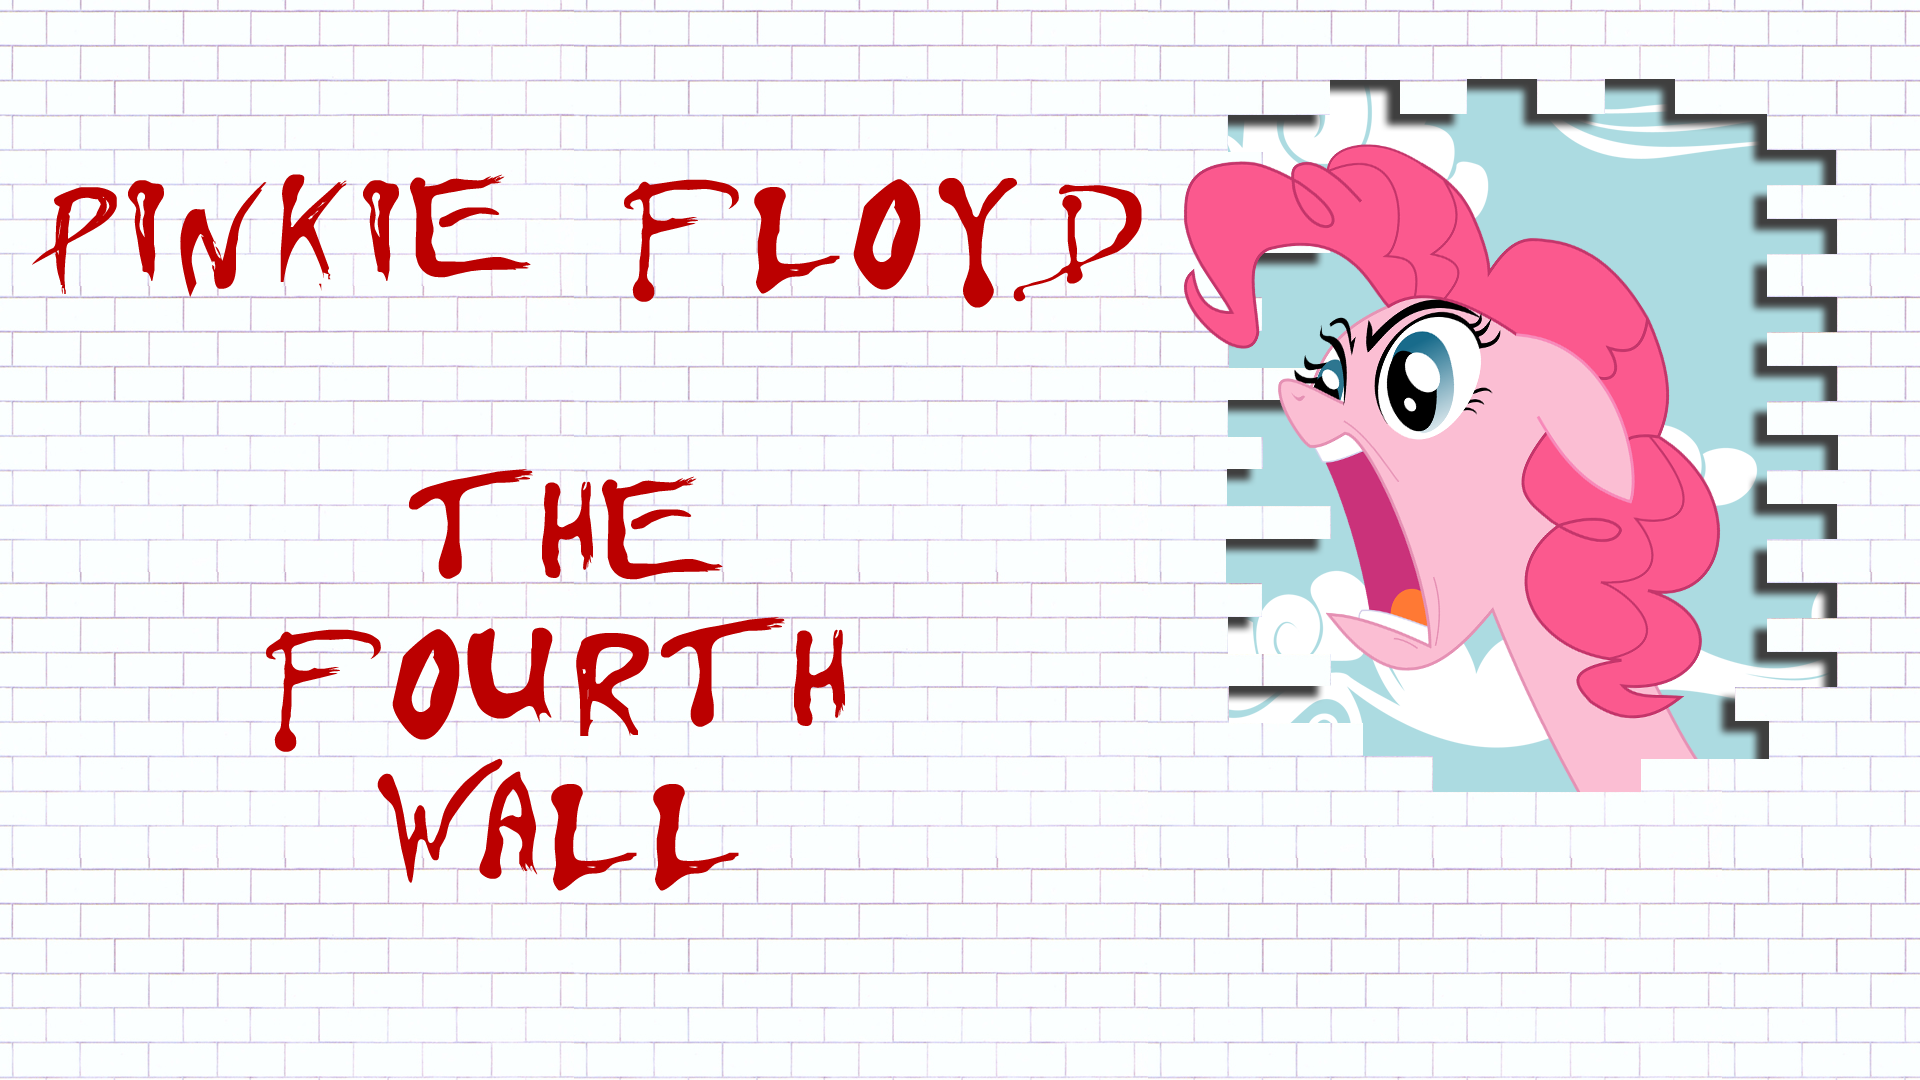 pinkie_floyd___the_fourth_wall___wallpaper_by_bluedragonhans-d4rxnlw.png